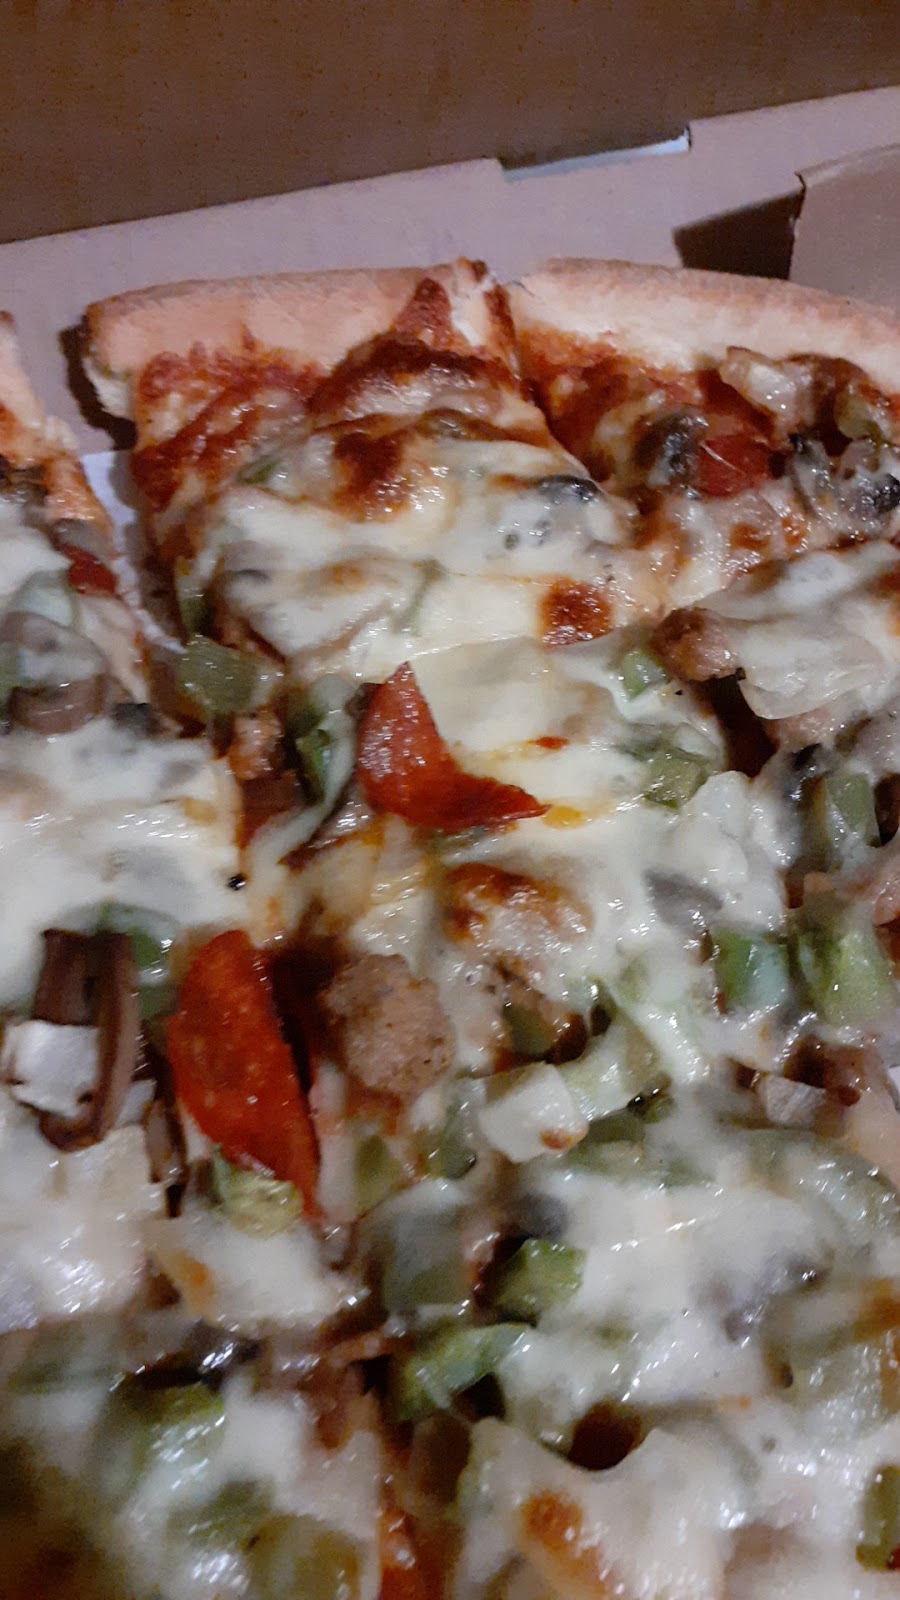 Teresas Pizza-University Hts | 2165 S Taylor Rd, University Heights, OH 44118 | Phone: (216) 321-3900